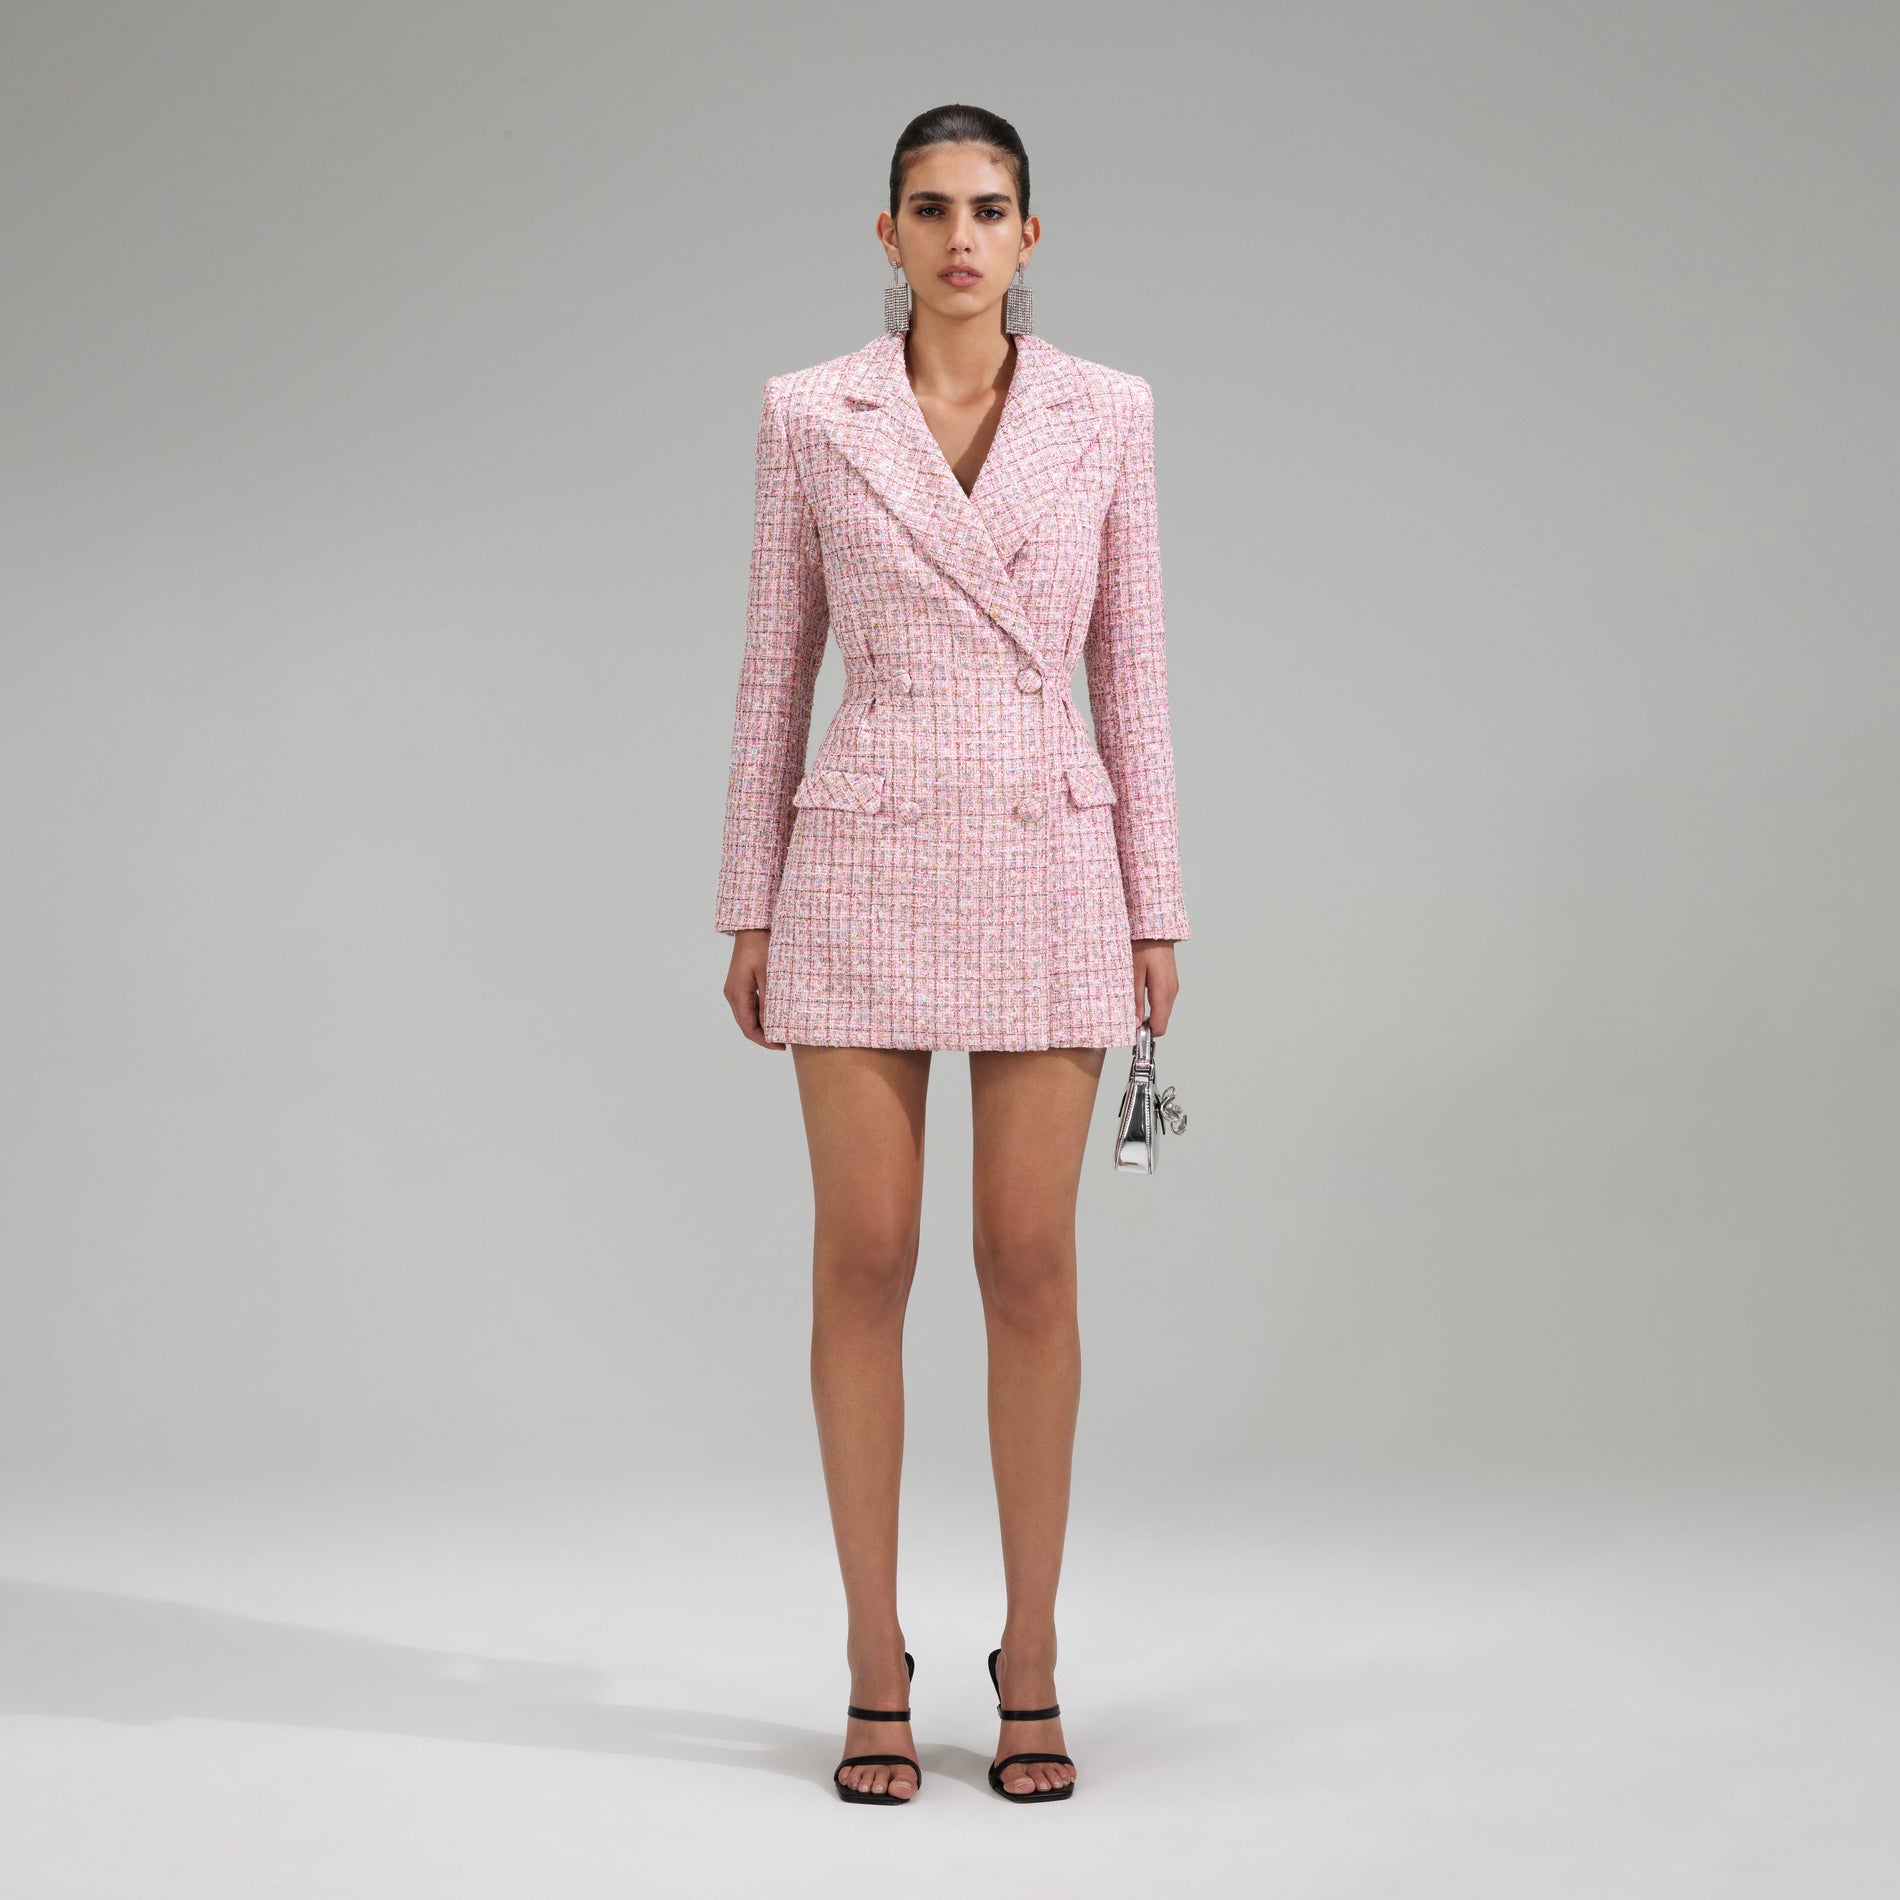 A woman wearing the Pink V Neck Boucle Tailored Mini Dress